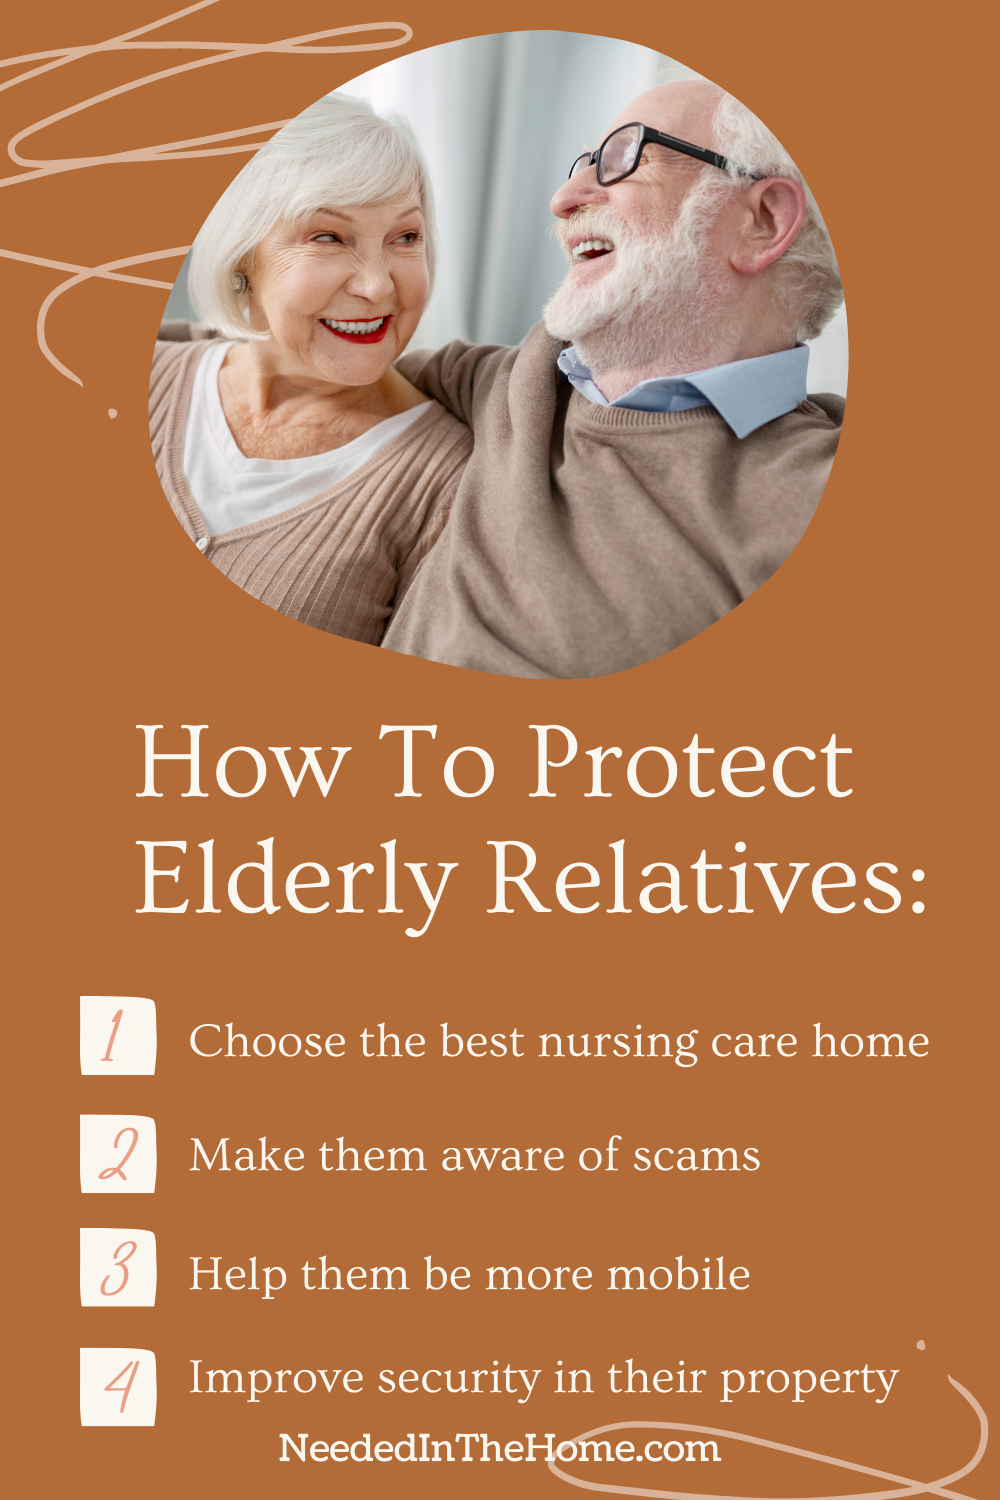 pinterest-pin-description how to protect elderly relatives 4 check boxes of tips senior woman man neededinthehome 